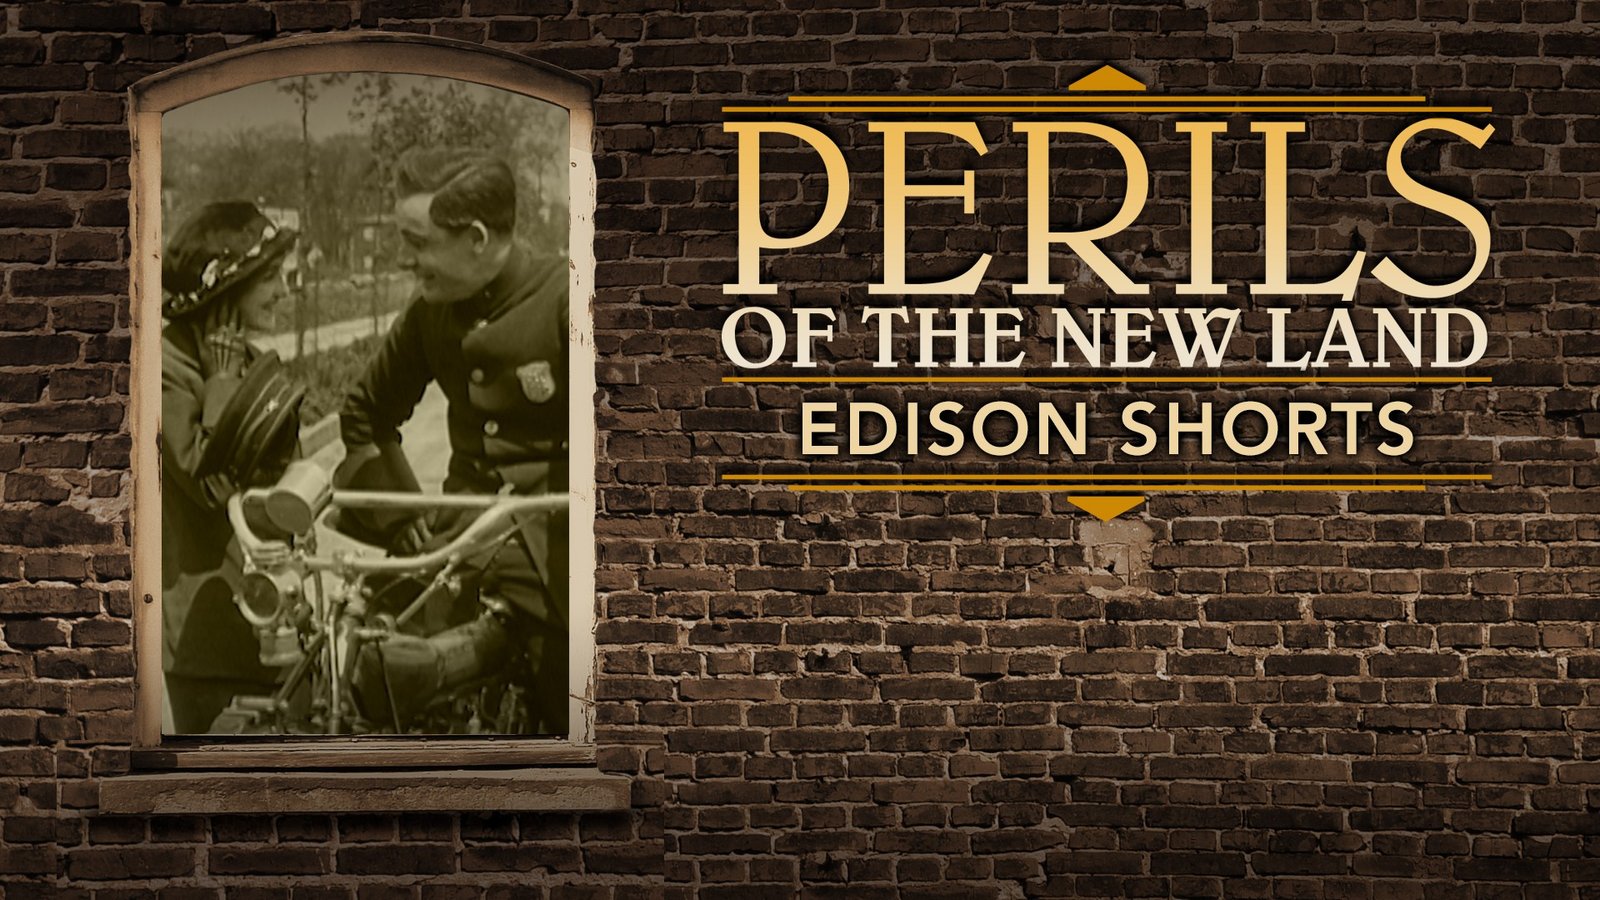 Edison Shorts: Perils of the New Land - Films of the Immigrant Experience